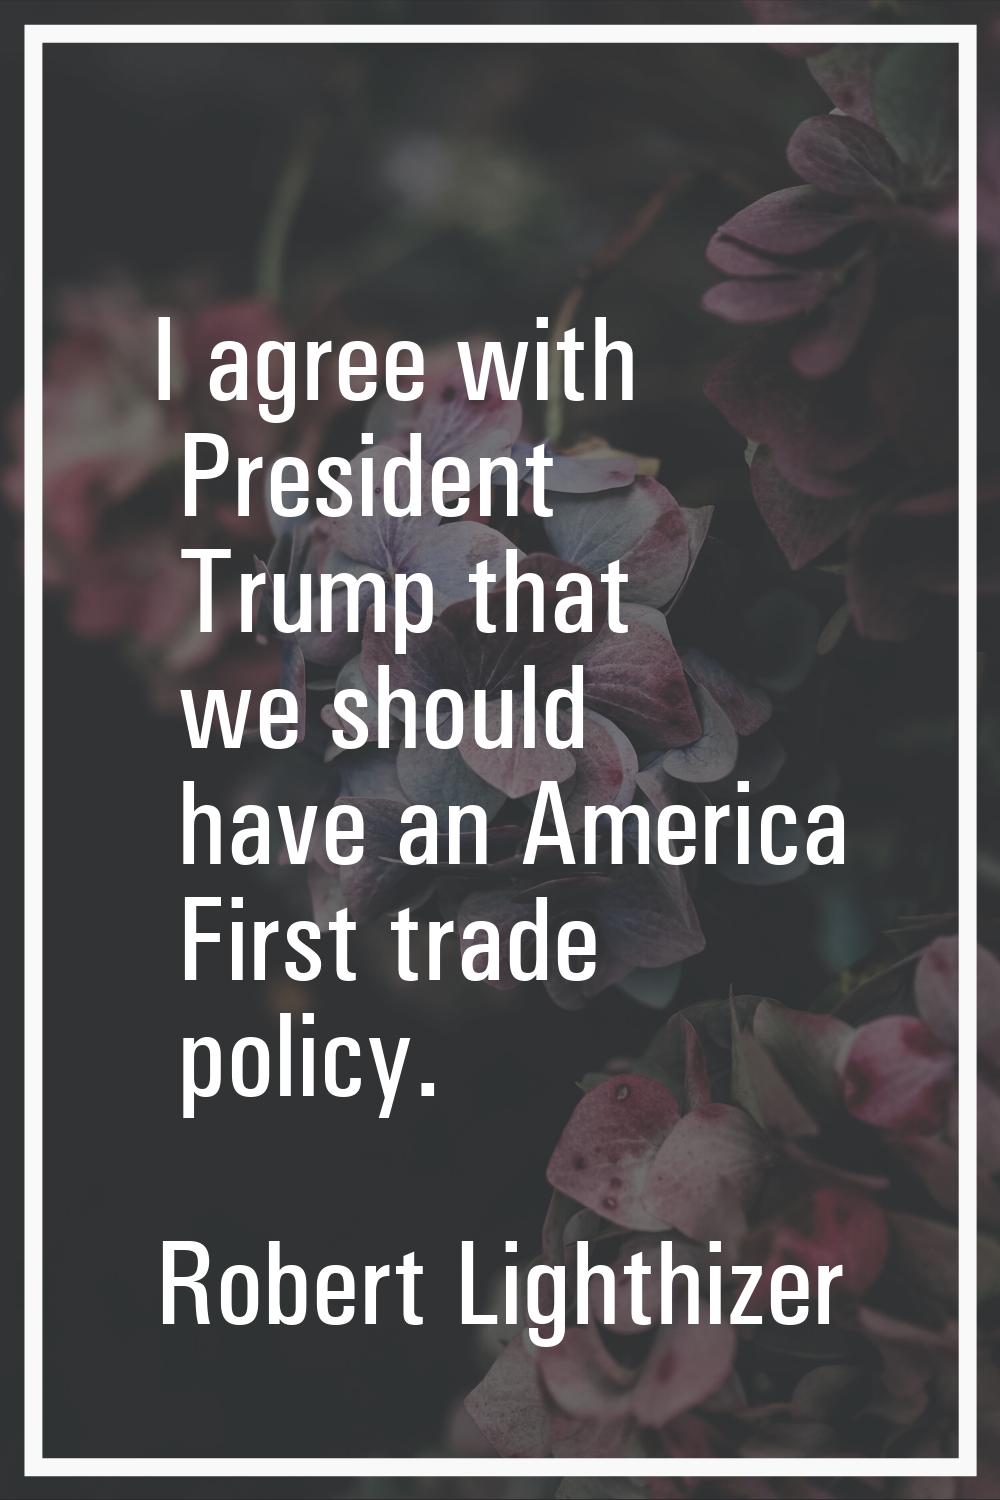 I agree with President Trump that we should have an America First trade policy.